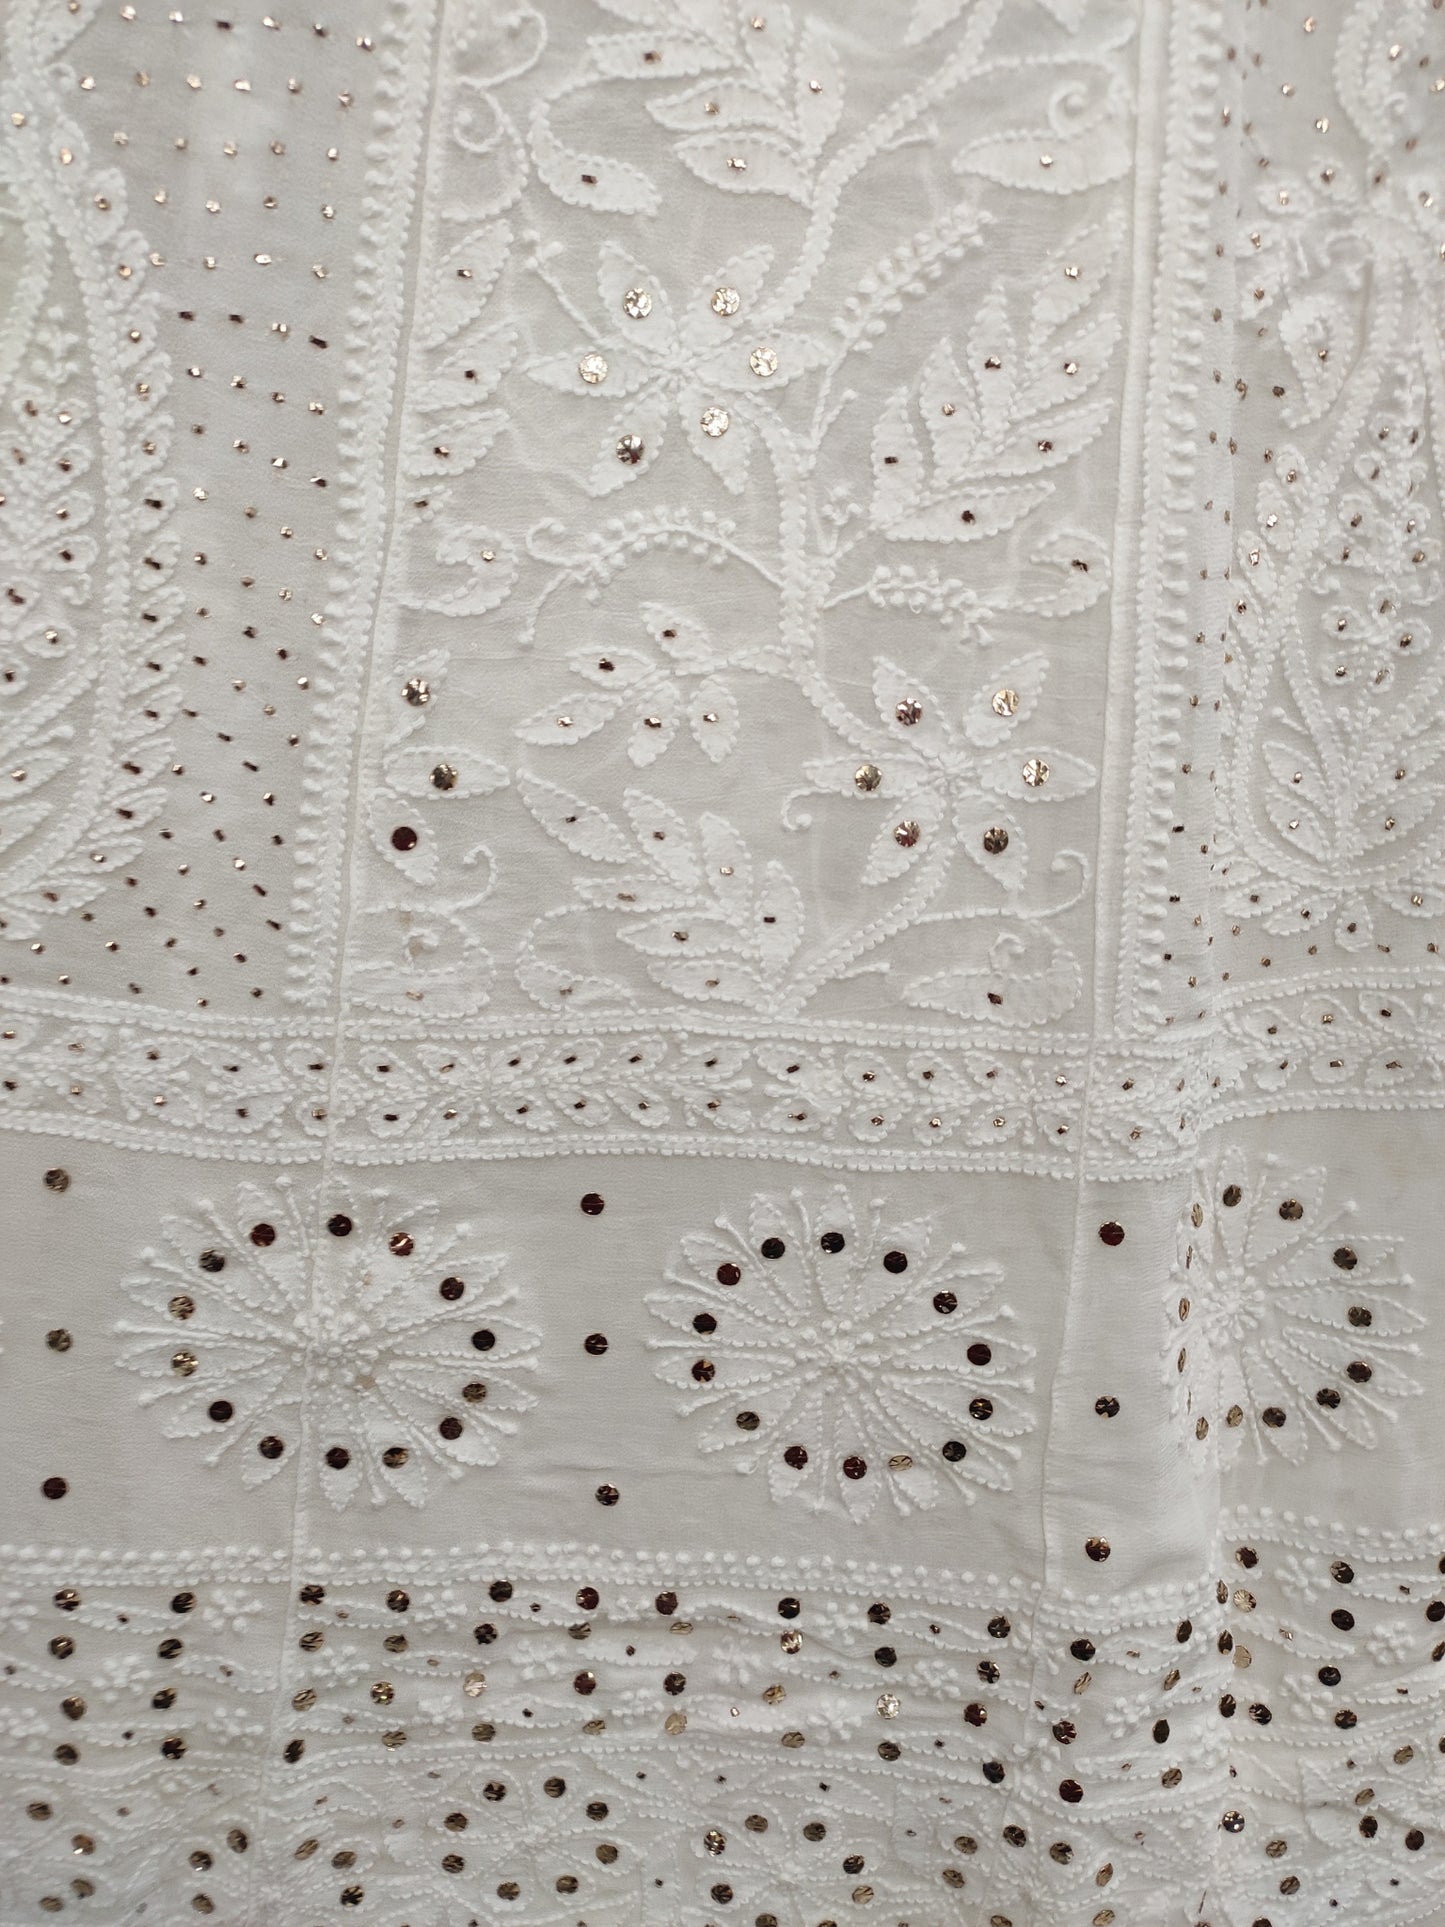 Hand Embroidered White HQ Viscose Georgette Lucknowi Chikankari Unstitched Anarkali (Set of 2) With Mukaish Work S20463